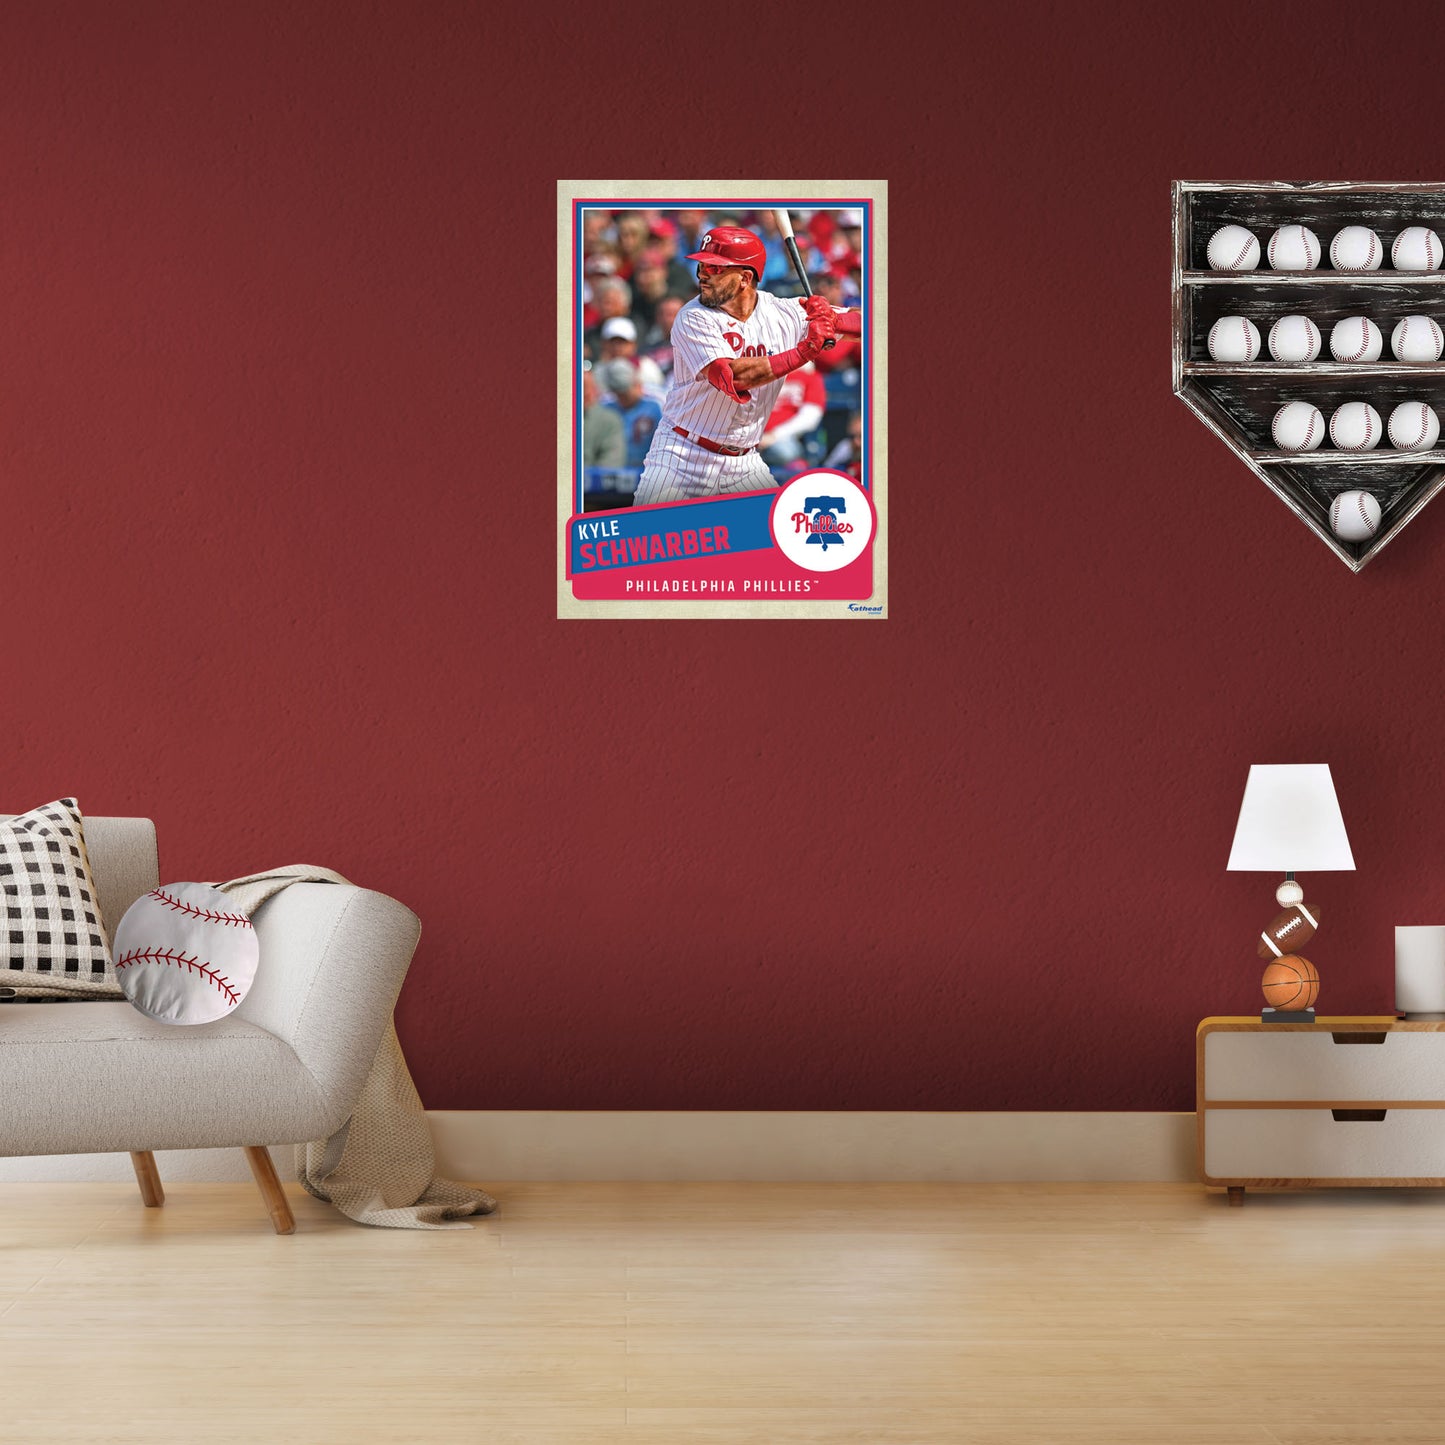 Kyle Schwarber Baseball Paper Poster Phillies 6 Wall And Art Print